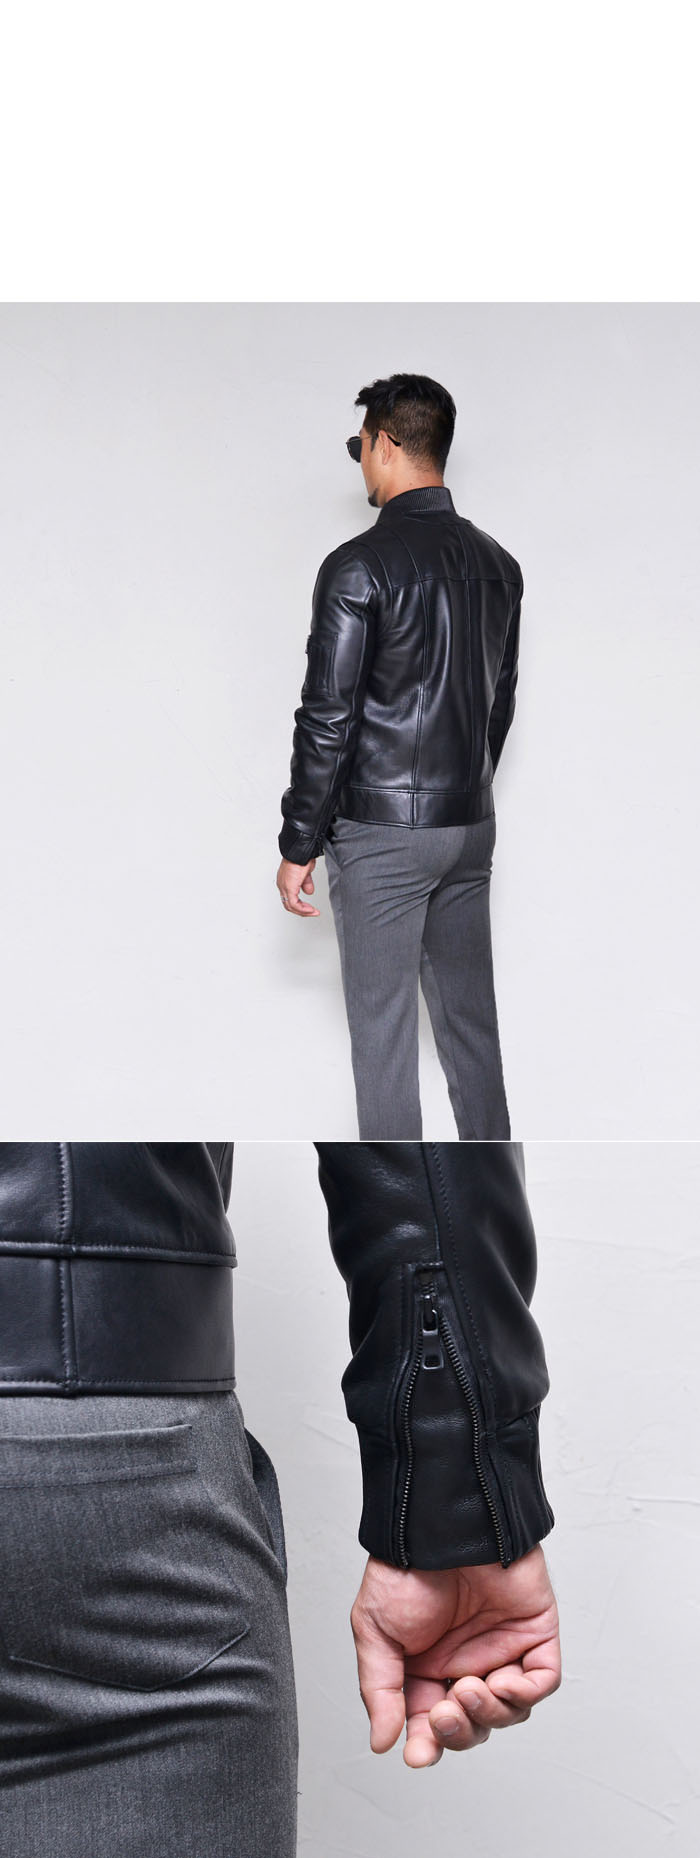 Leather141_10